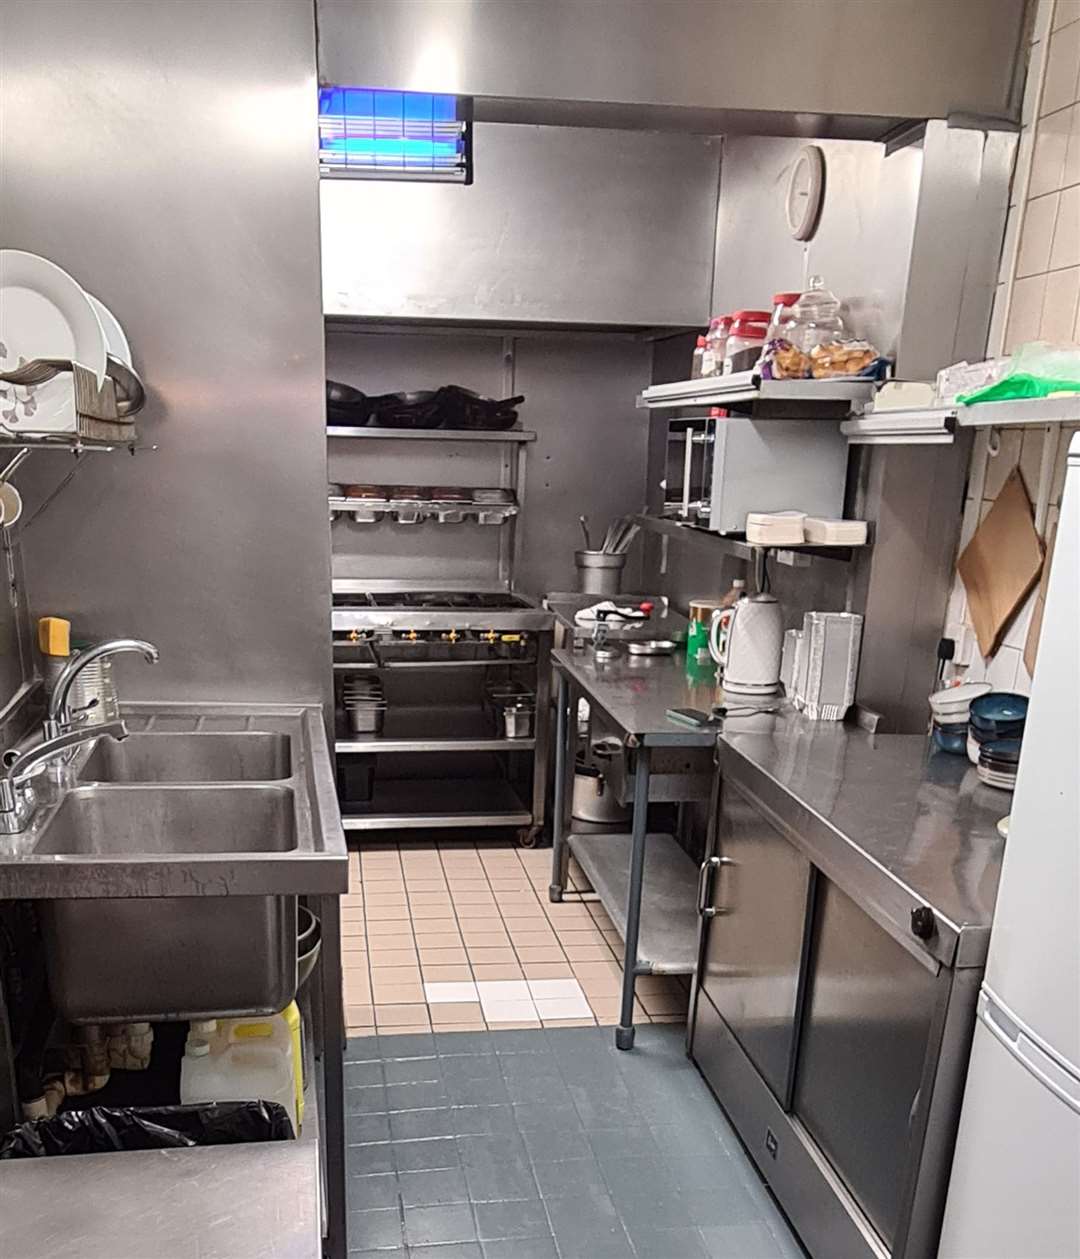 The owners of Rahman’s Golden Oven in Herne Bay have fitted out the restaurant kitchen with brand-new equipment